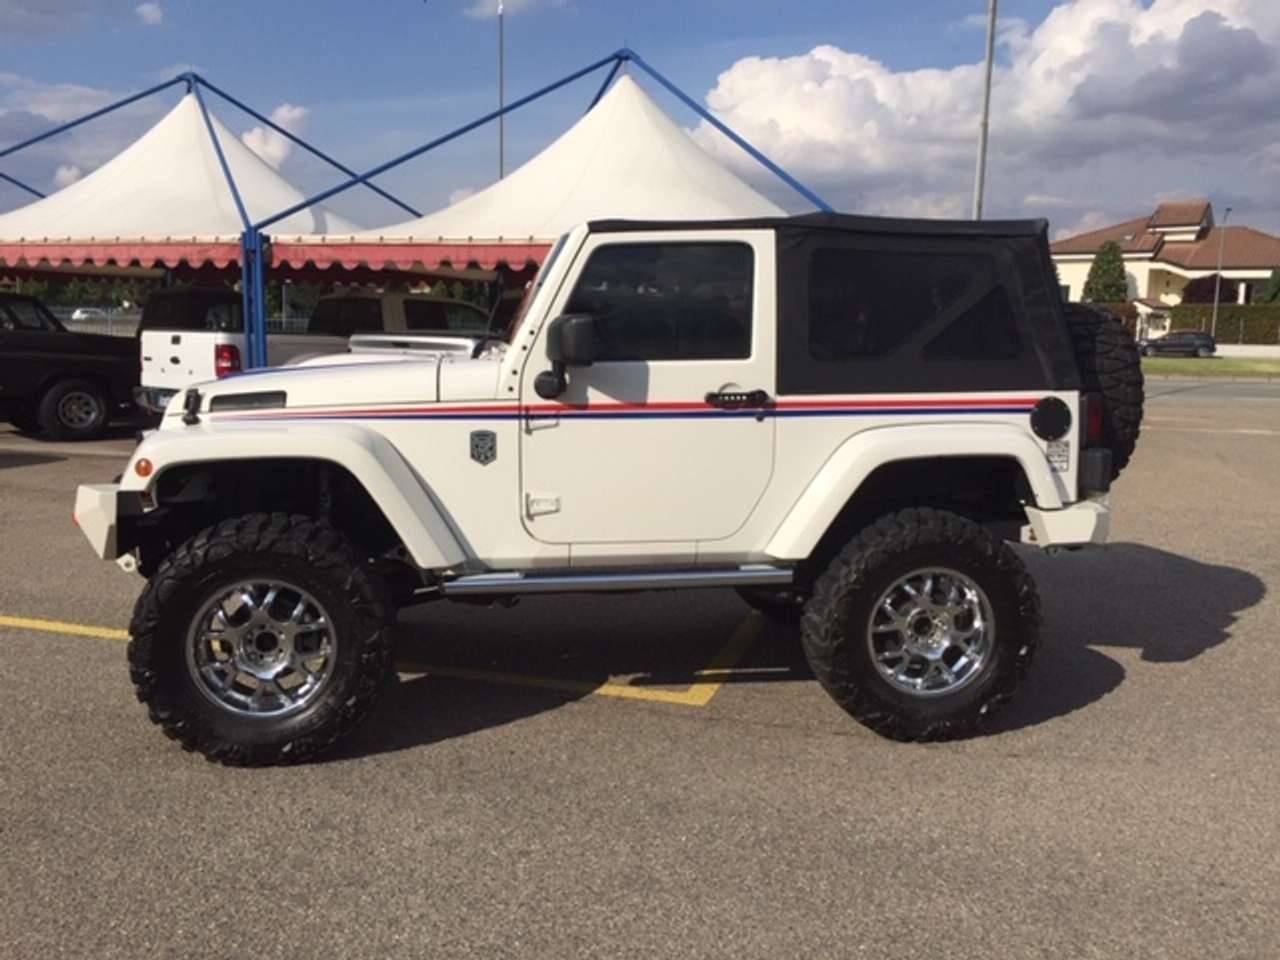 For Sale Jeep Wrangler 3.8 Rubicon (2011) offered for AUD